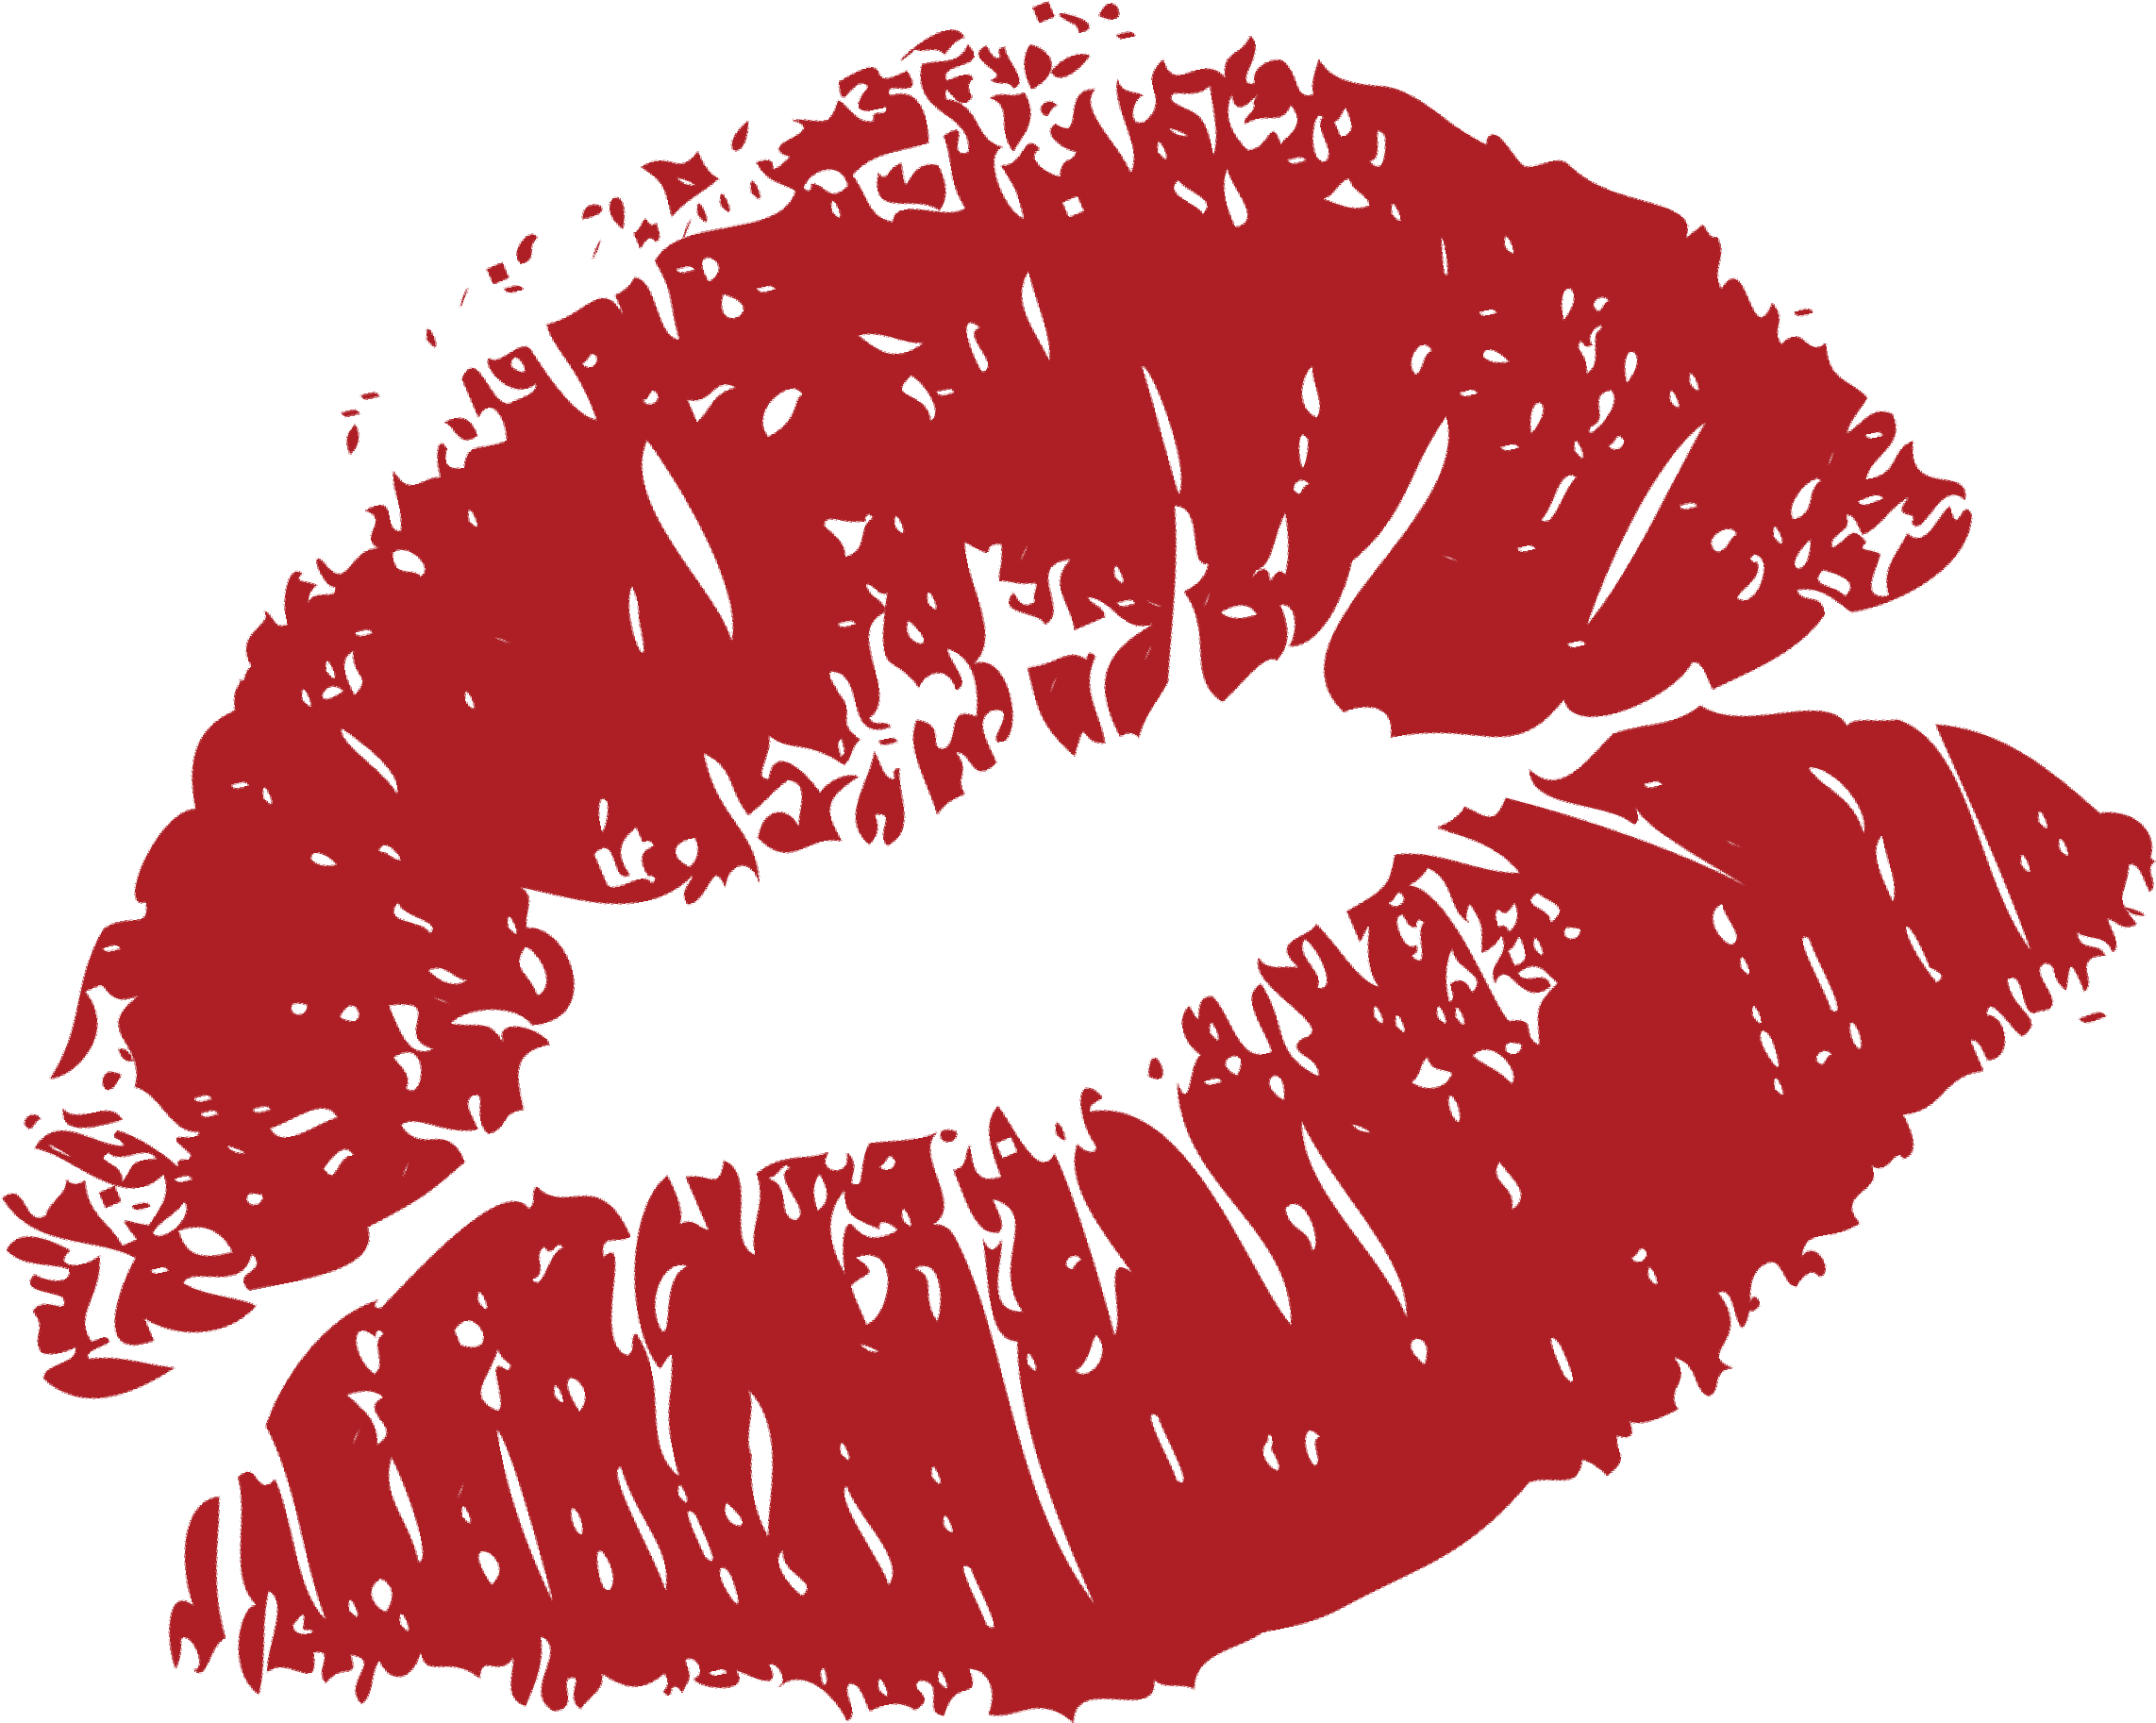 A Red Lips Print On A Black Background